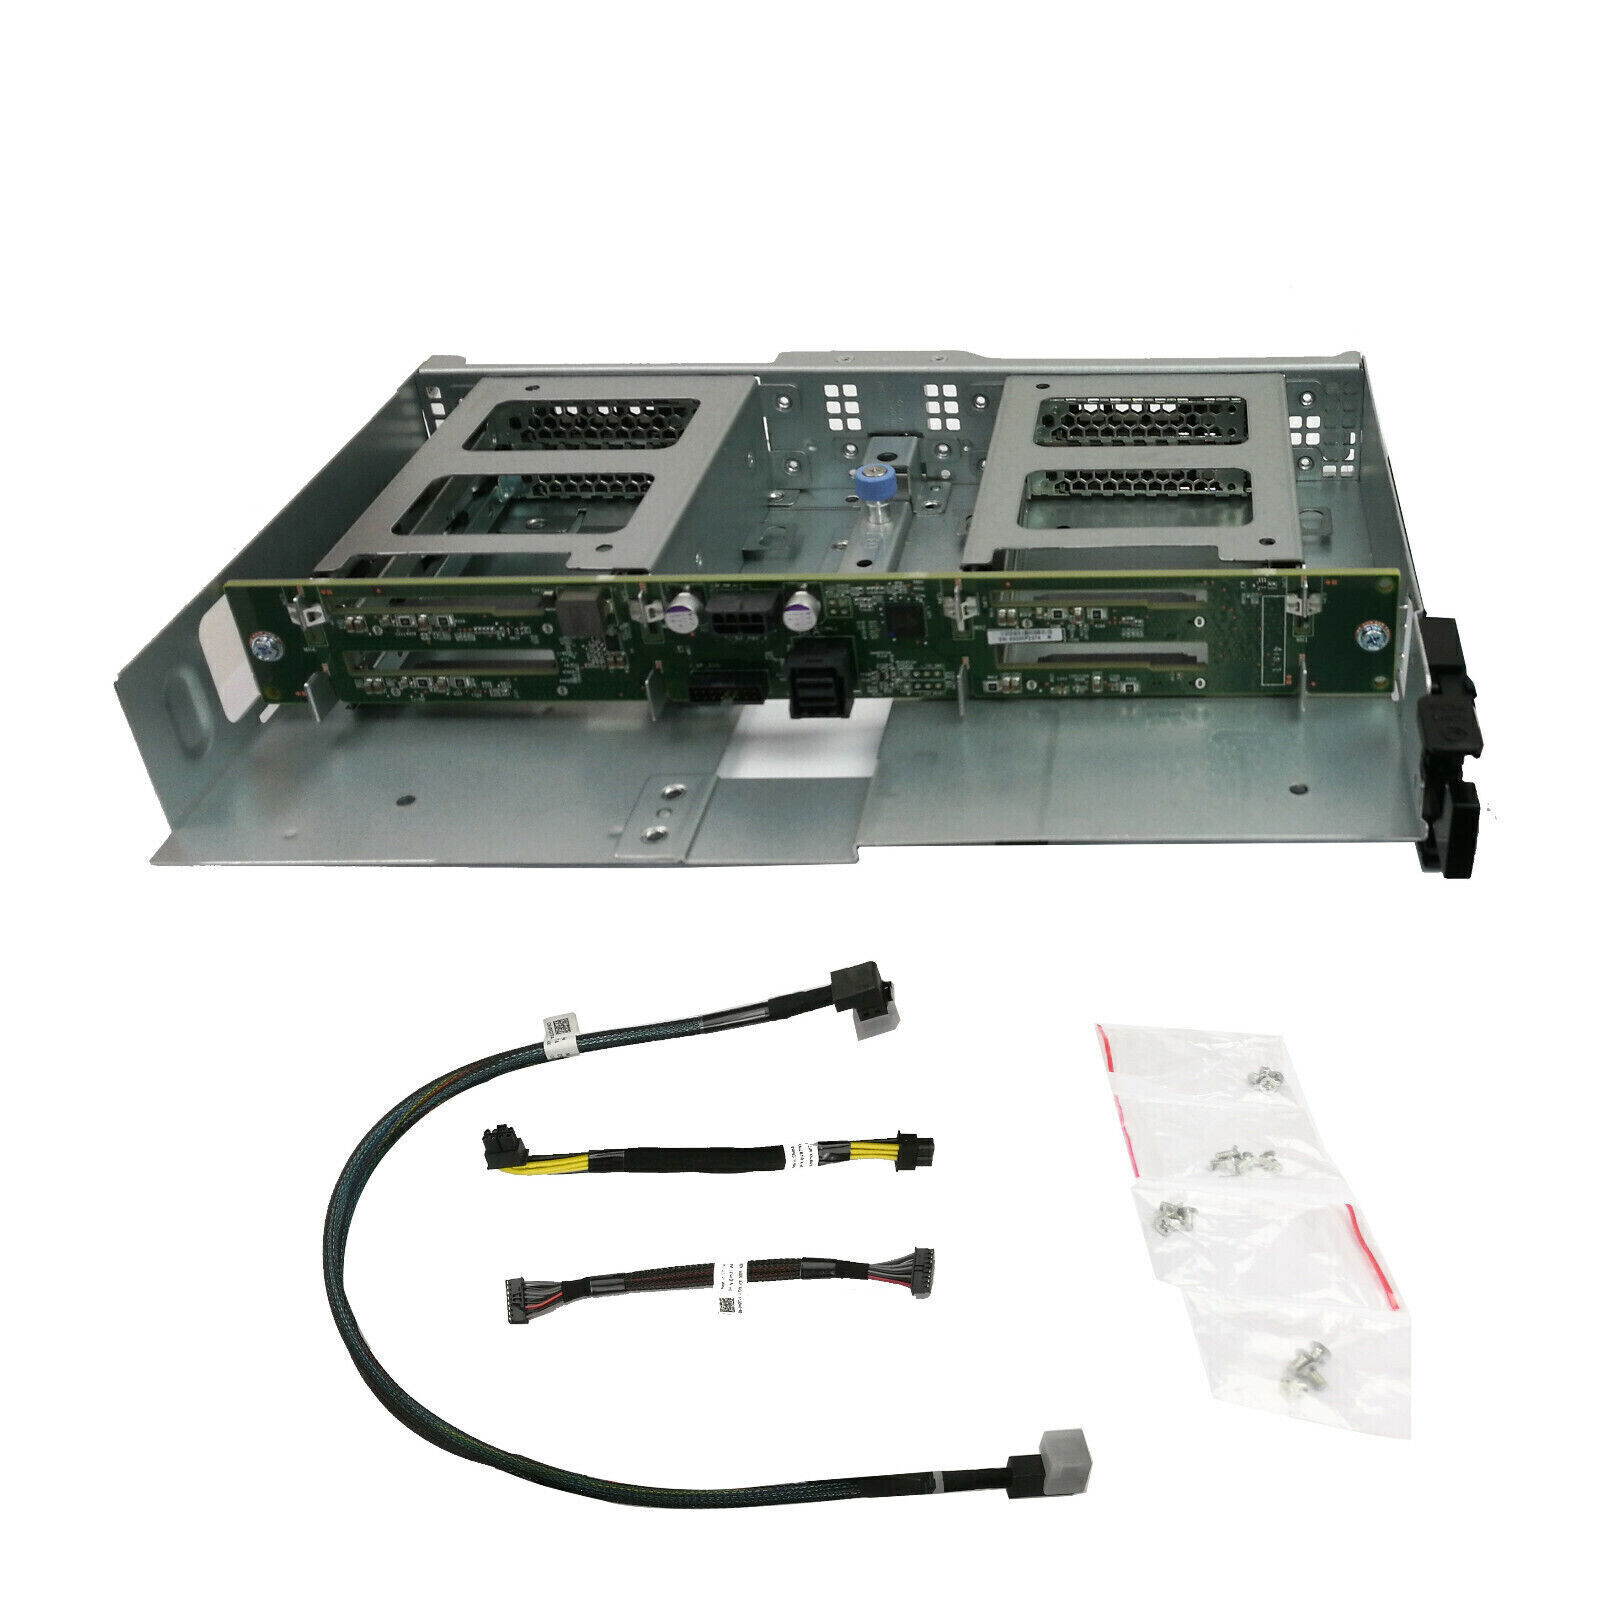 Dell R740XD 4*2.5inch Rear HDD Cage Back Panel Kit WMJR0 w/Caddy Cables